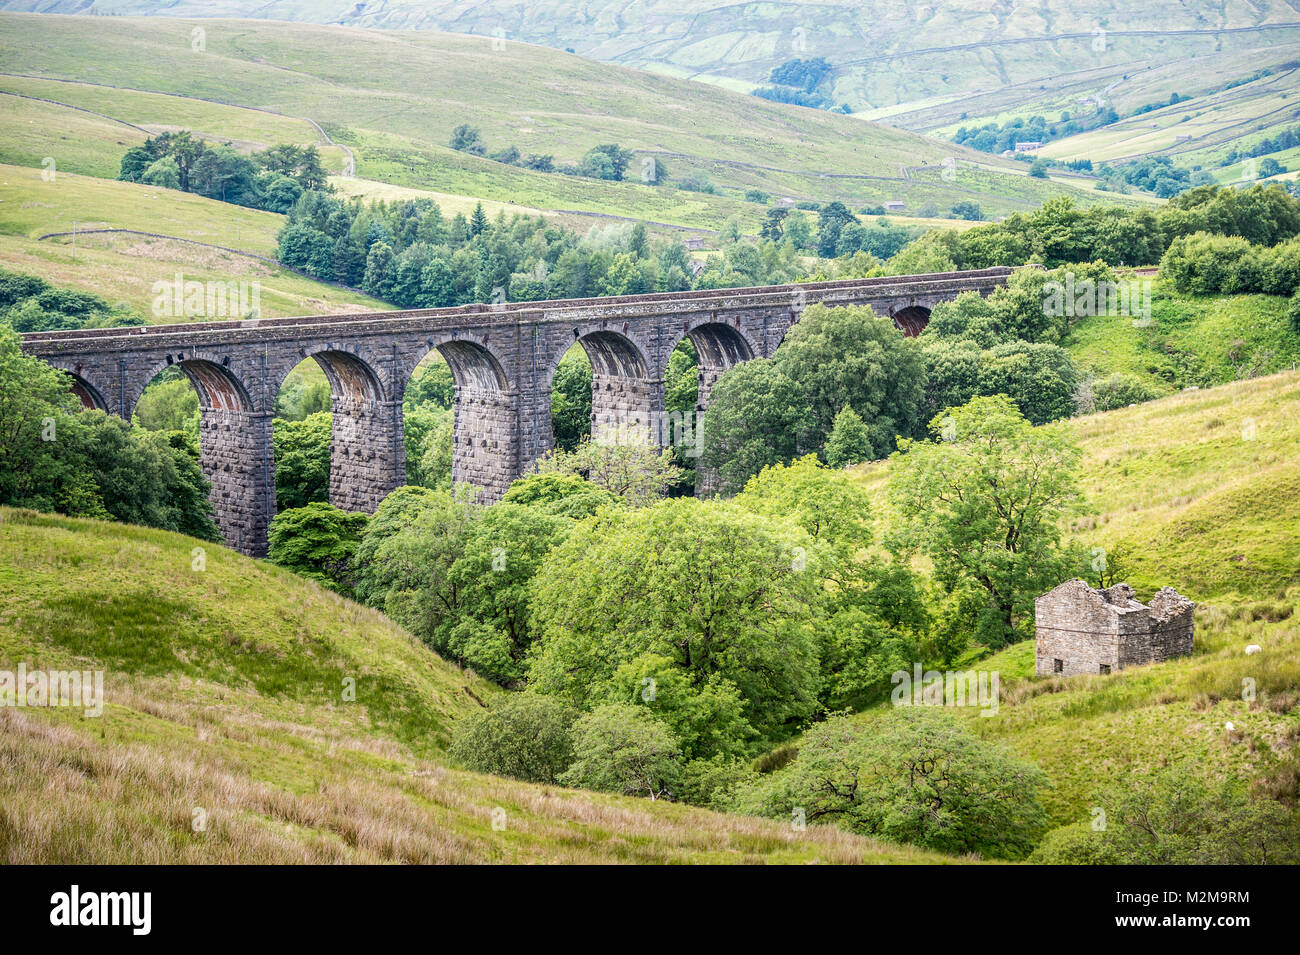 Extensive stone bridge allows for trains to cross over rolling hills of the Dales, Yorkshire Dales, UK Stock Photo